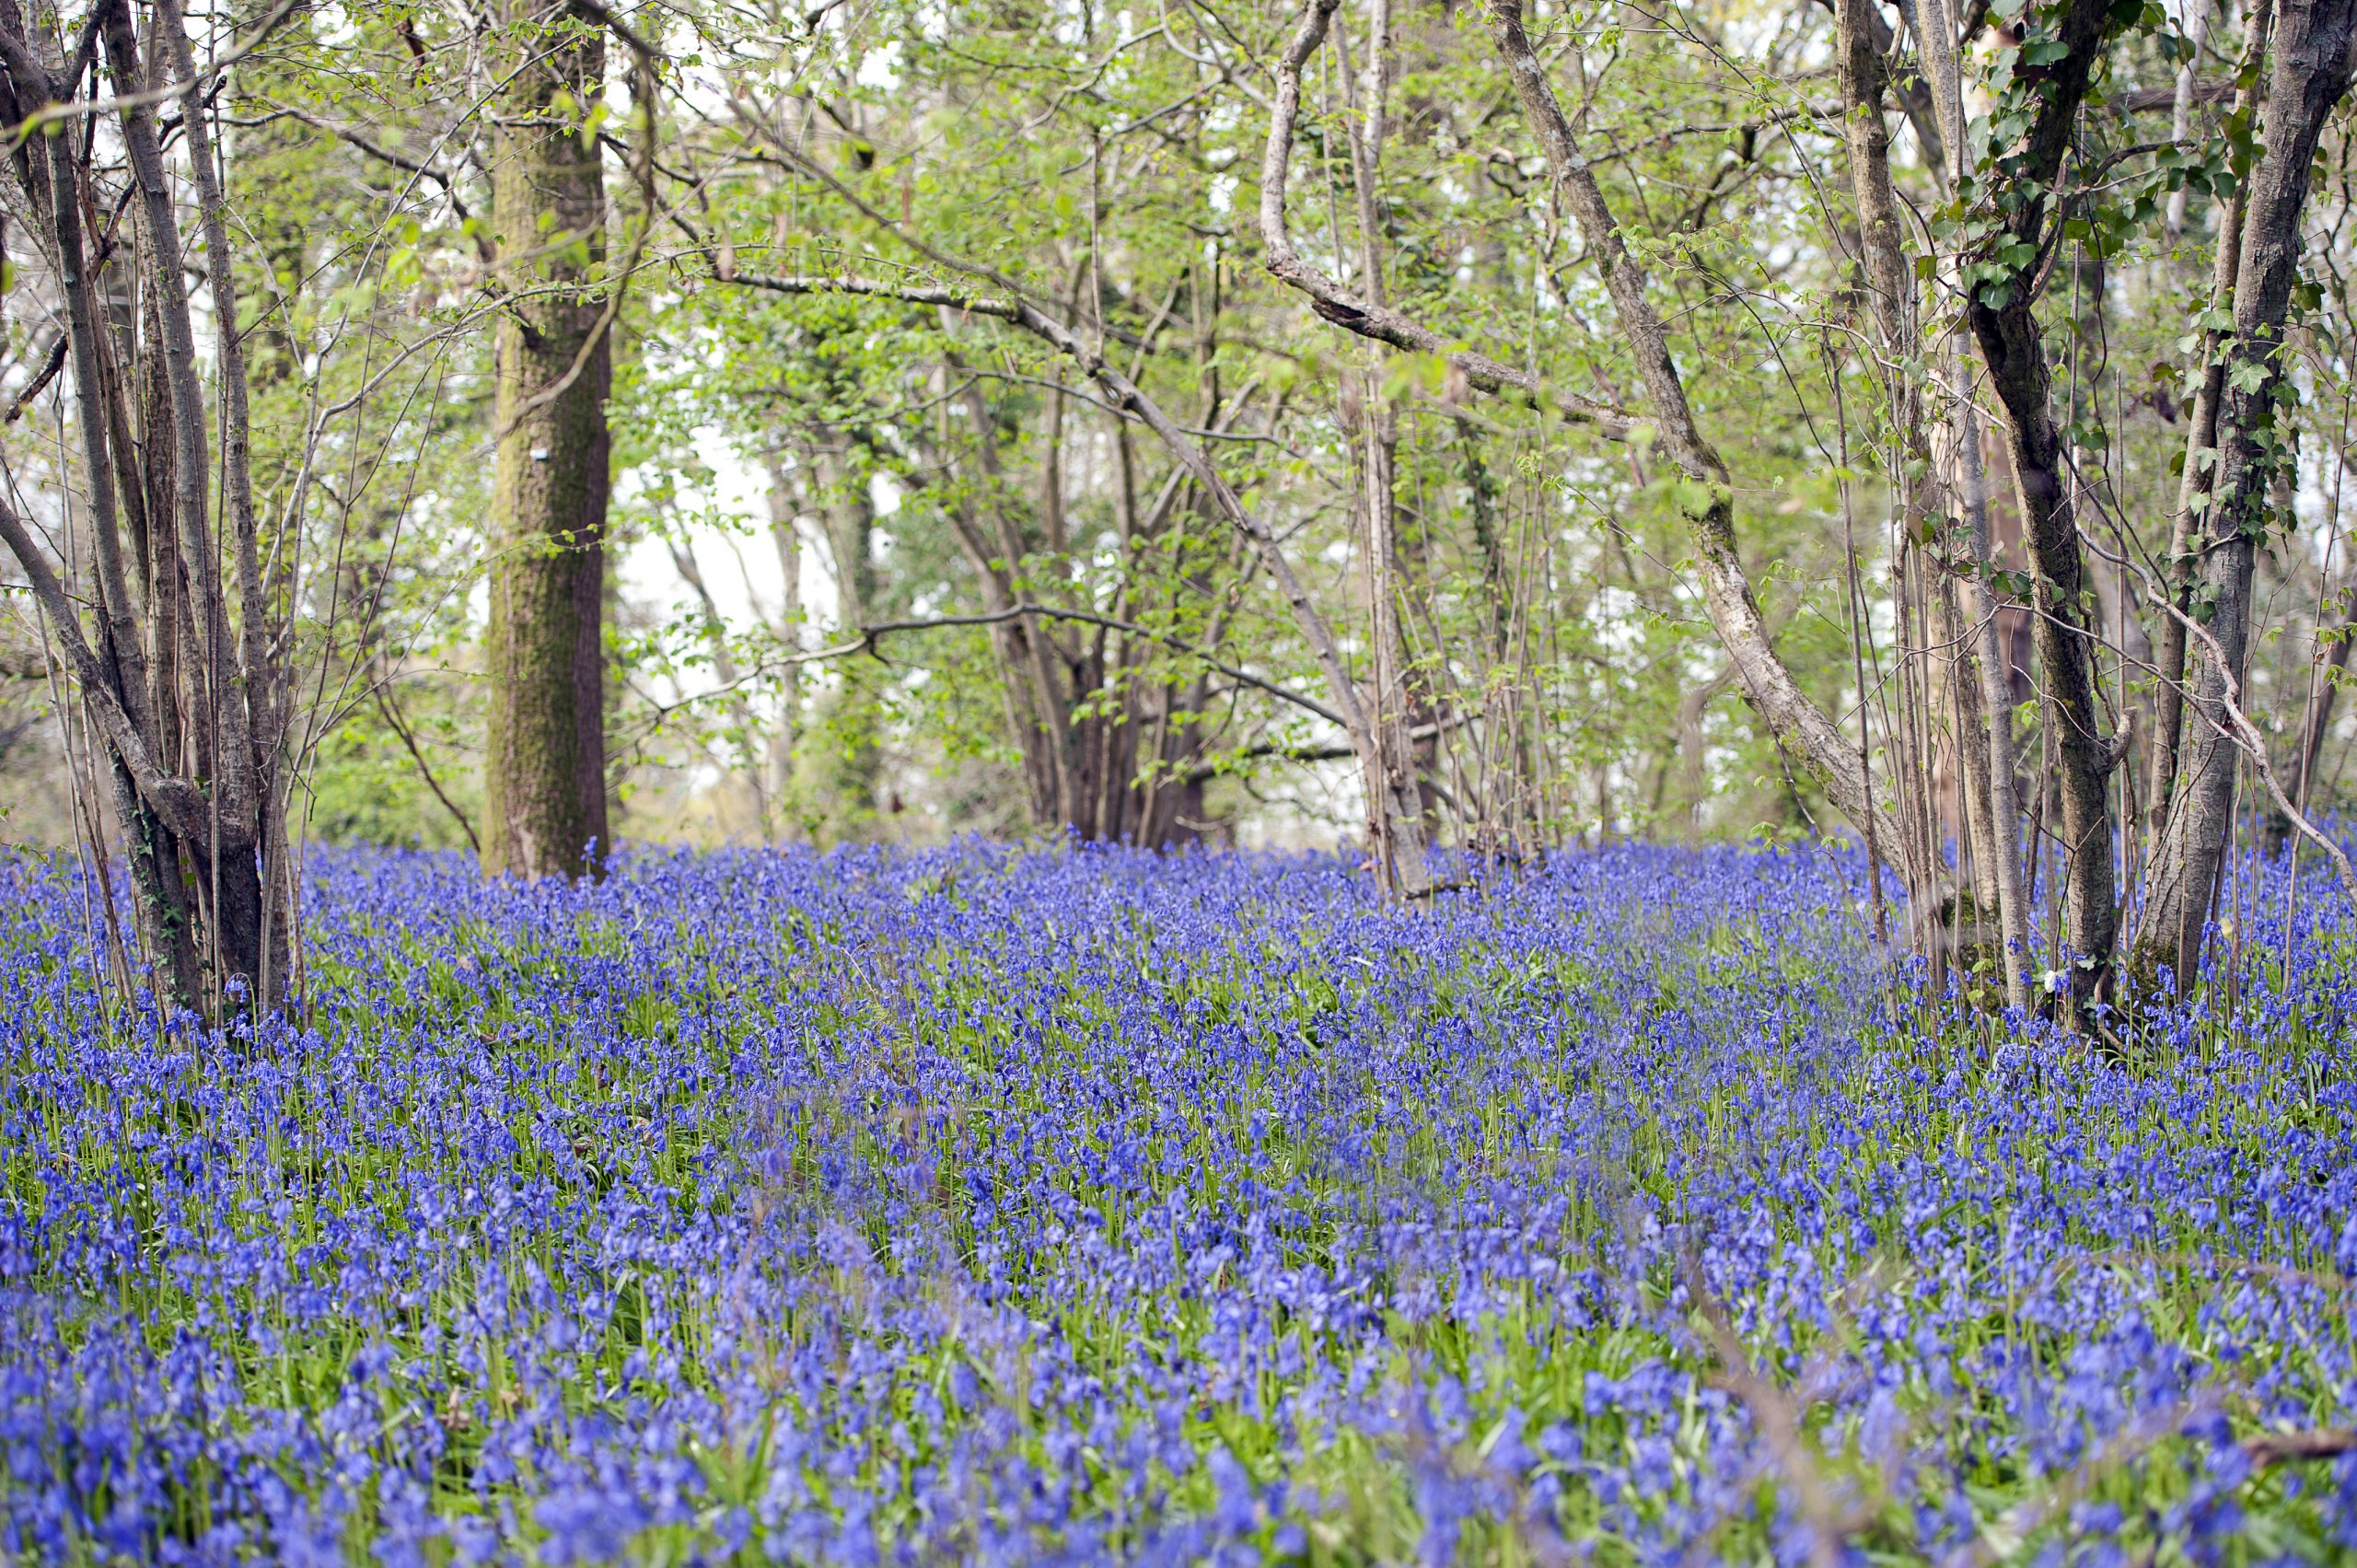 April abundance with a sea of flowering Bluebells in Pamhill, Wimborne, Dorset, England